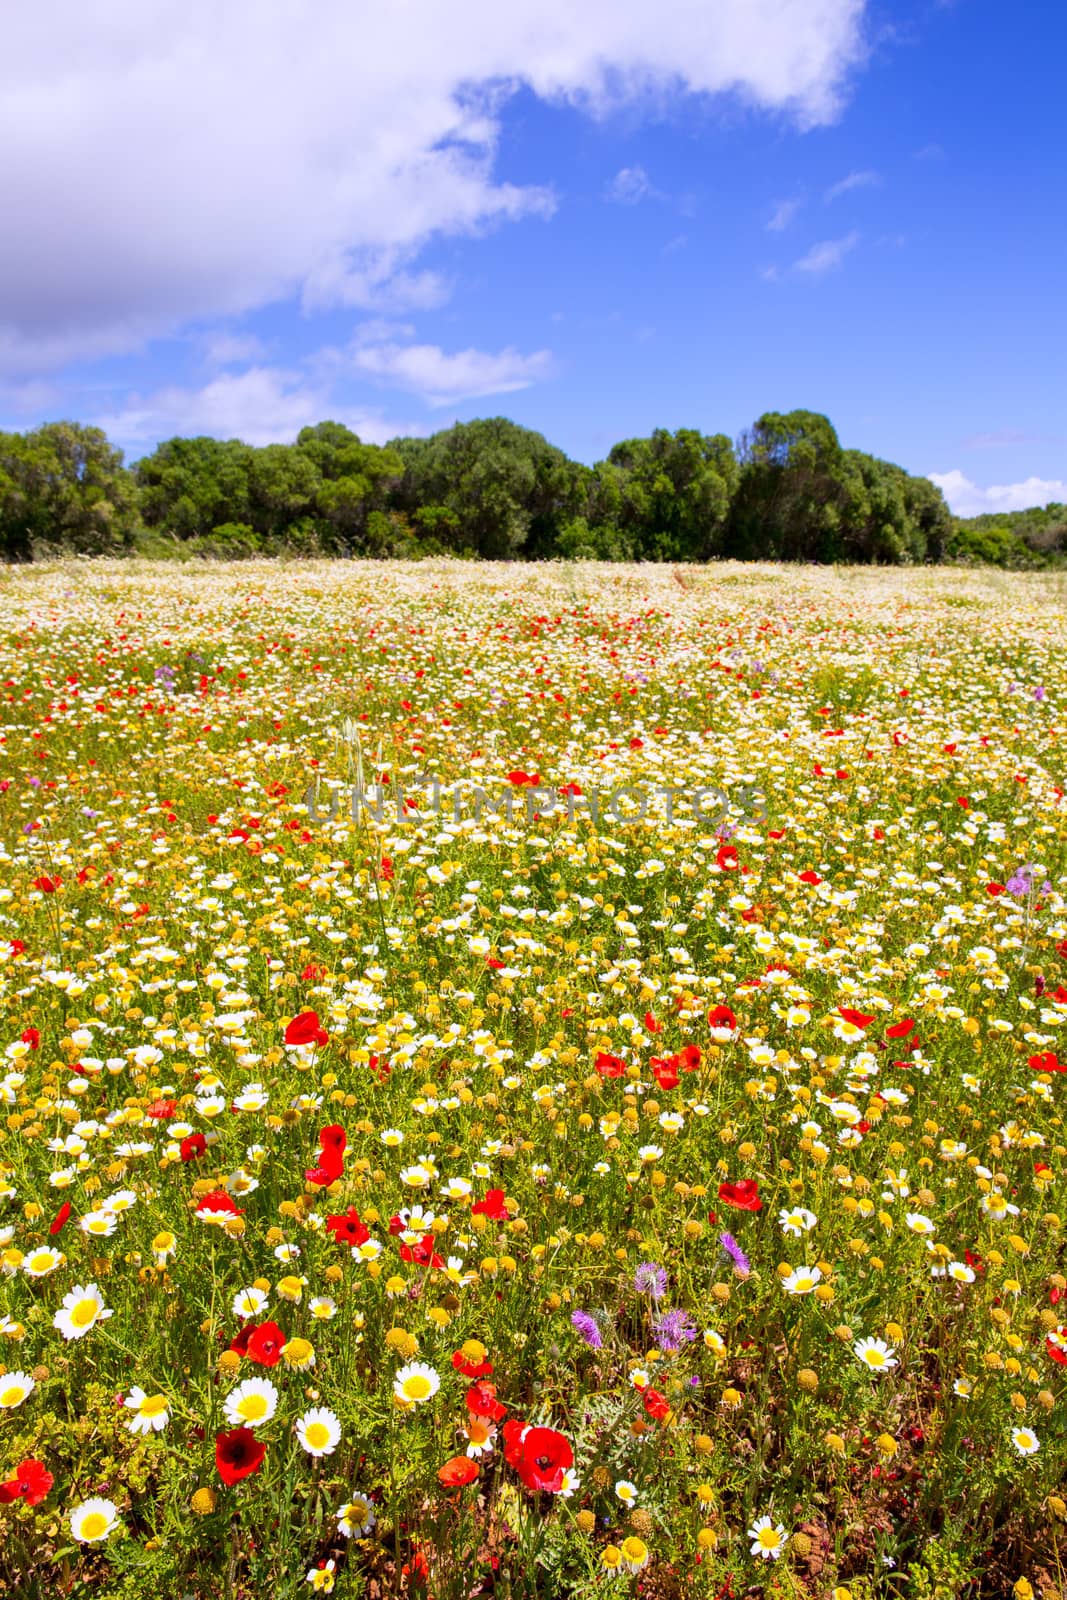 Menorca spring field with poppies and daisy flowers in Balearic Islands